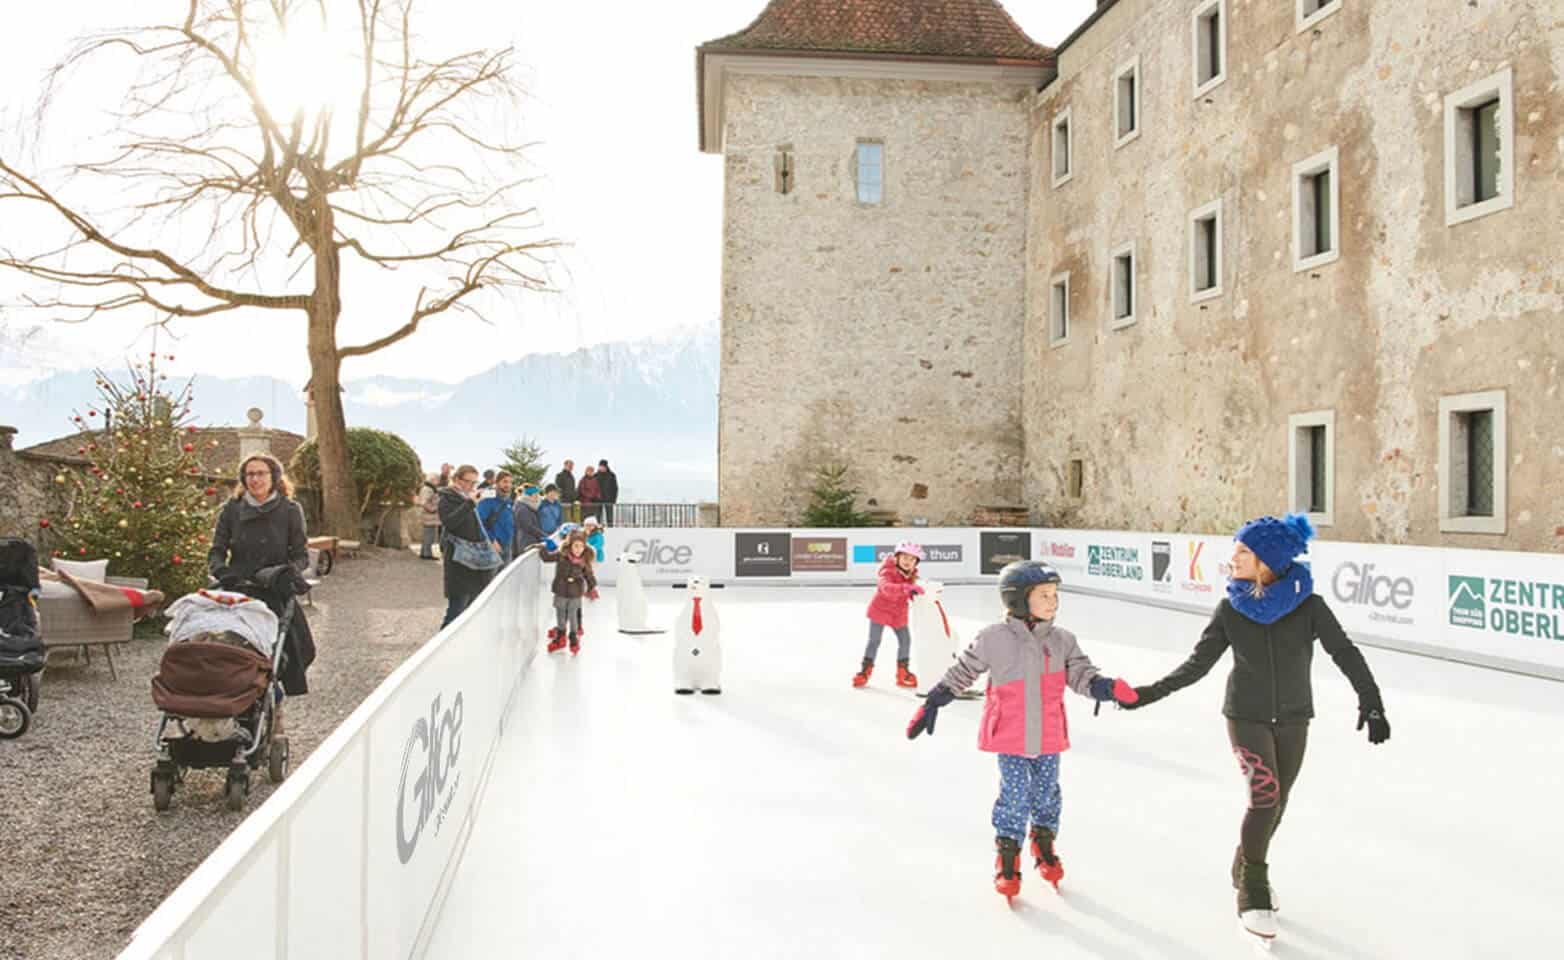 Christmas skating on synthetic ice rink in front of castle